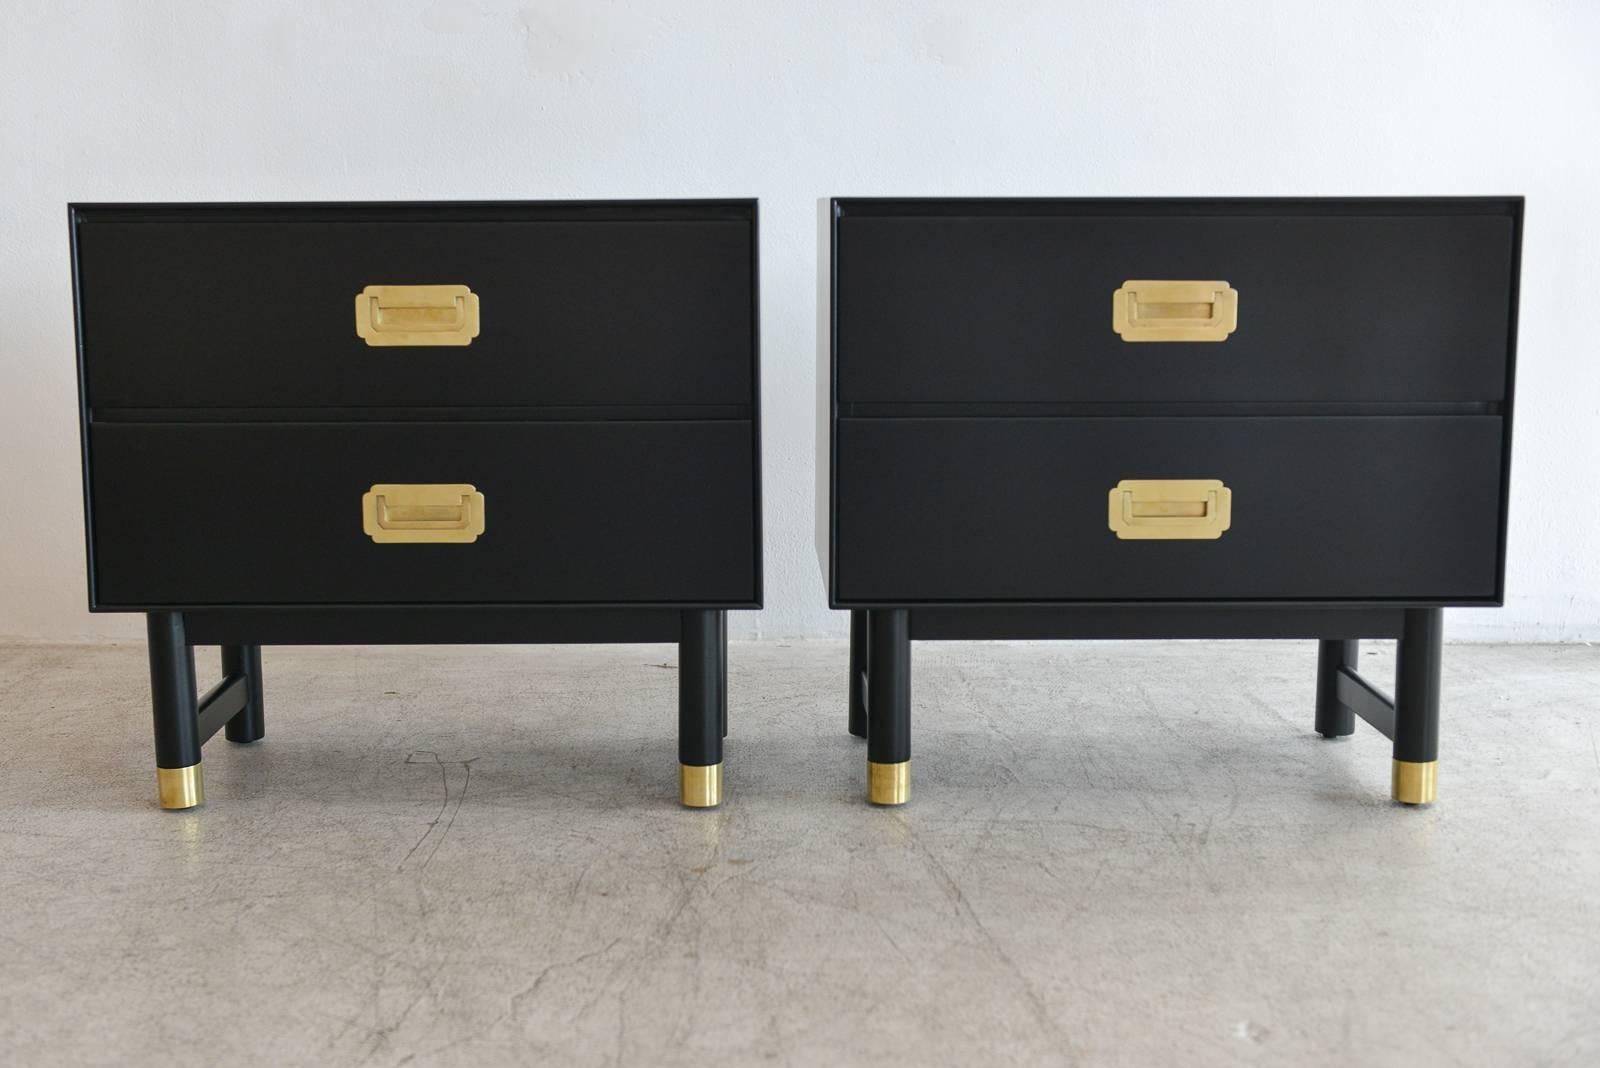 Pair of black lacquer and brass Campaign nightstands, circa 1960 by Barker Brothers Furniture. Professionally restored in showroom perfect condition with polished brass hardware and brass tipped front legs. Sold as a pair only. Beautiful as side